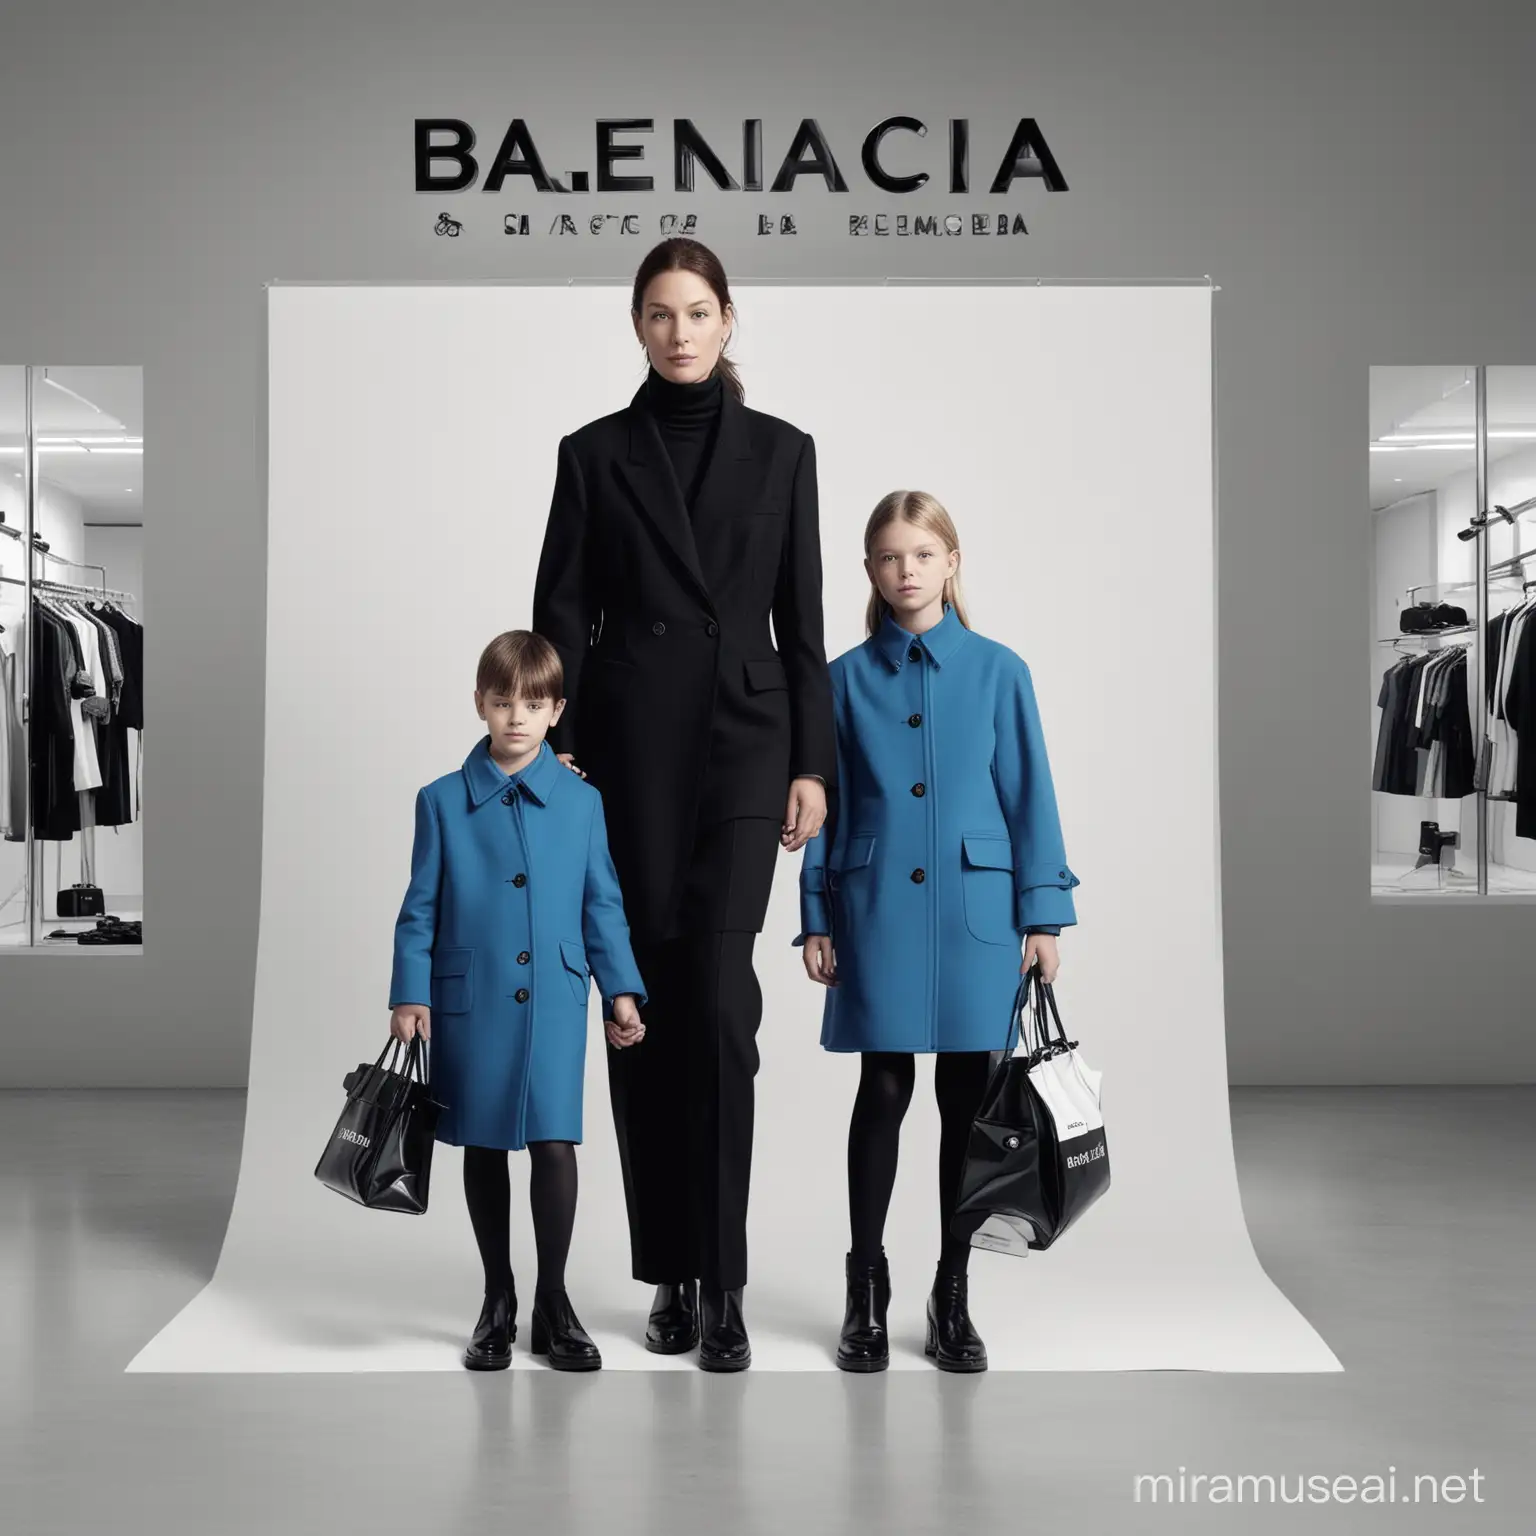 Celebrity Parents and Children Gracefully Model Balenciaga Outfits for Family Campaign